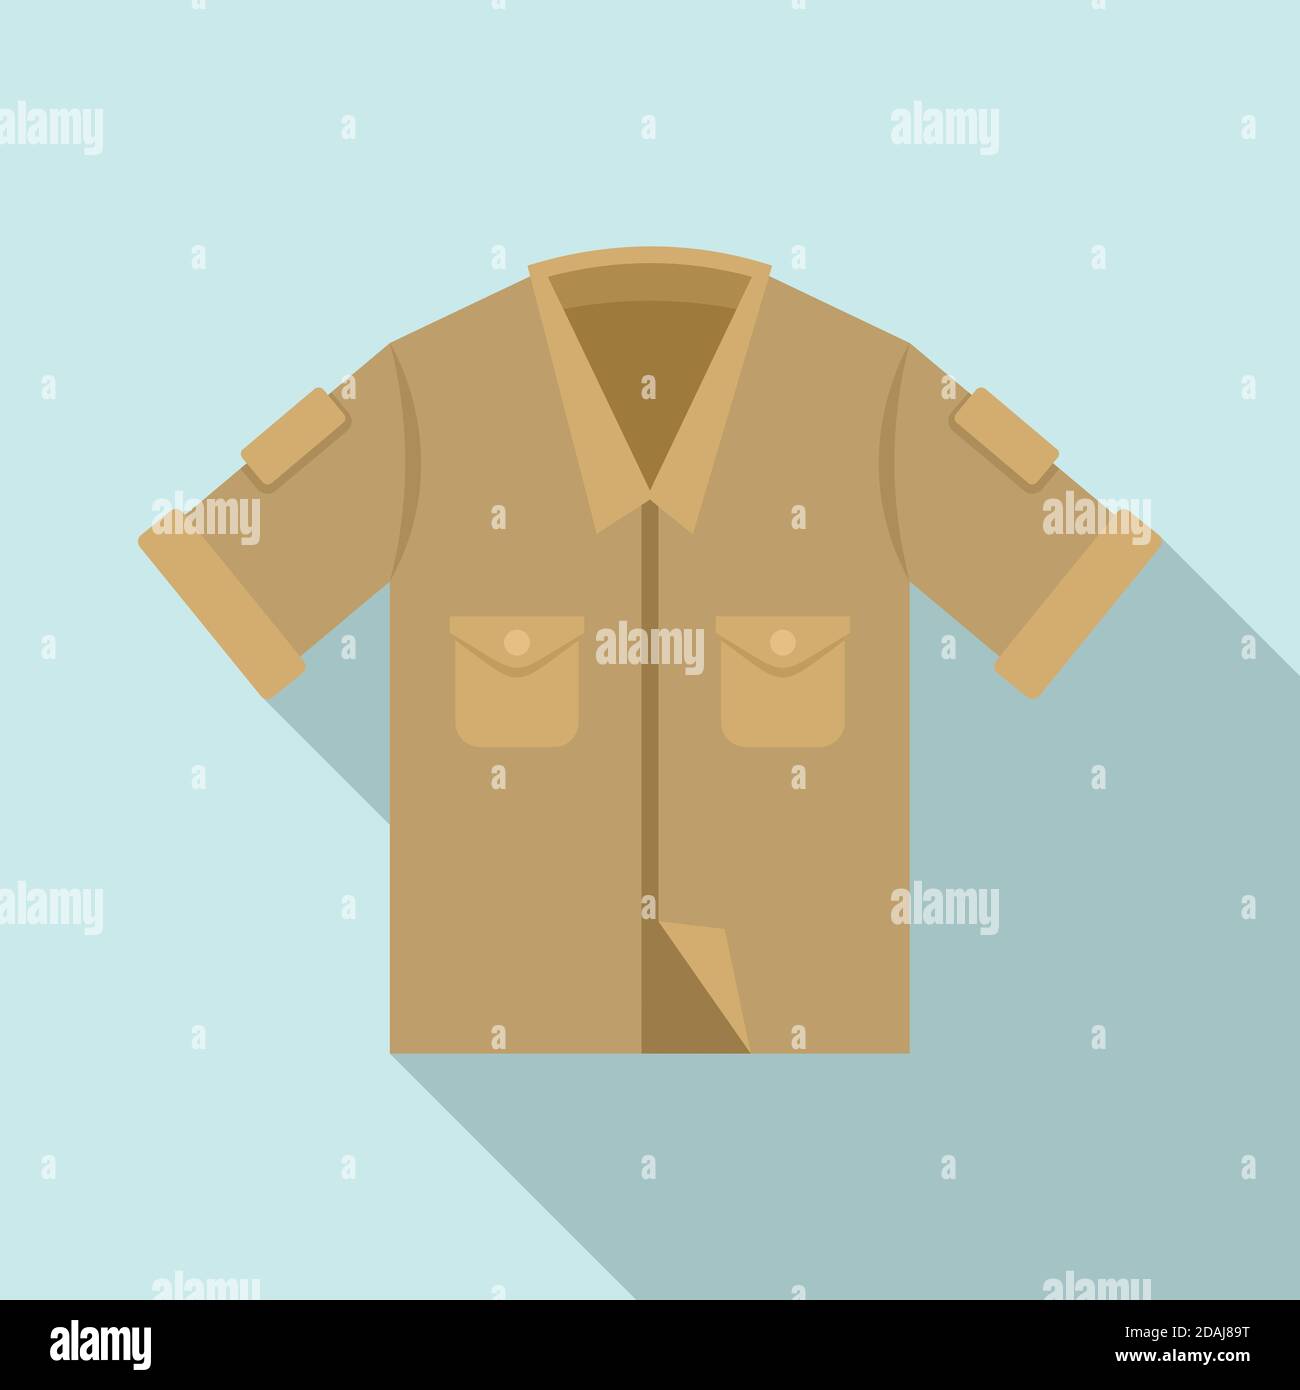 Boonie Stock Vector Images - Alamy